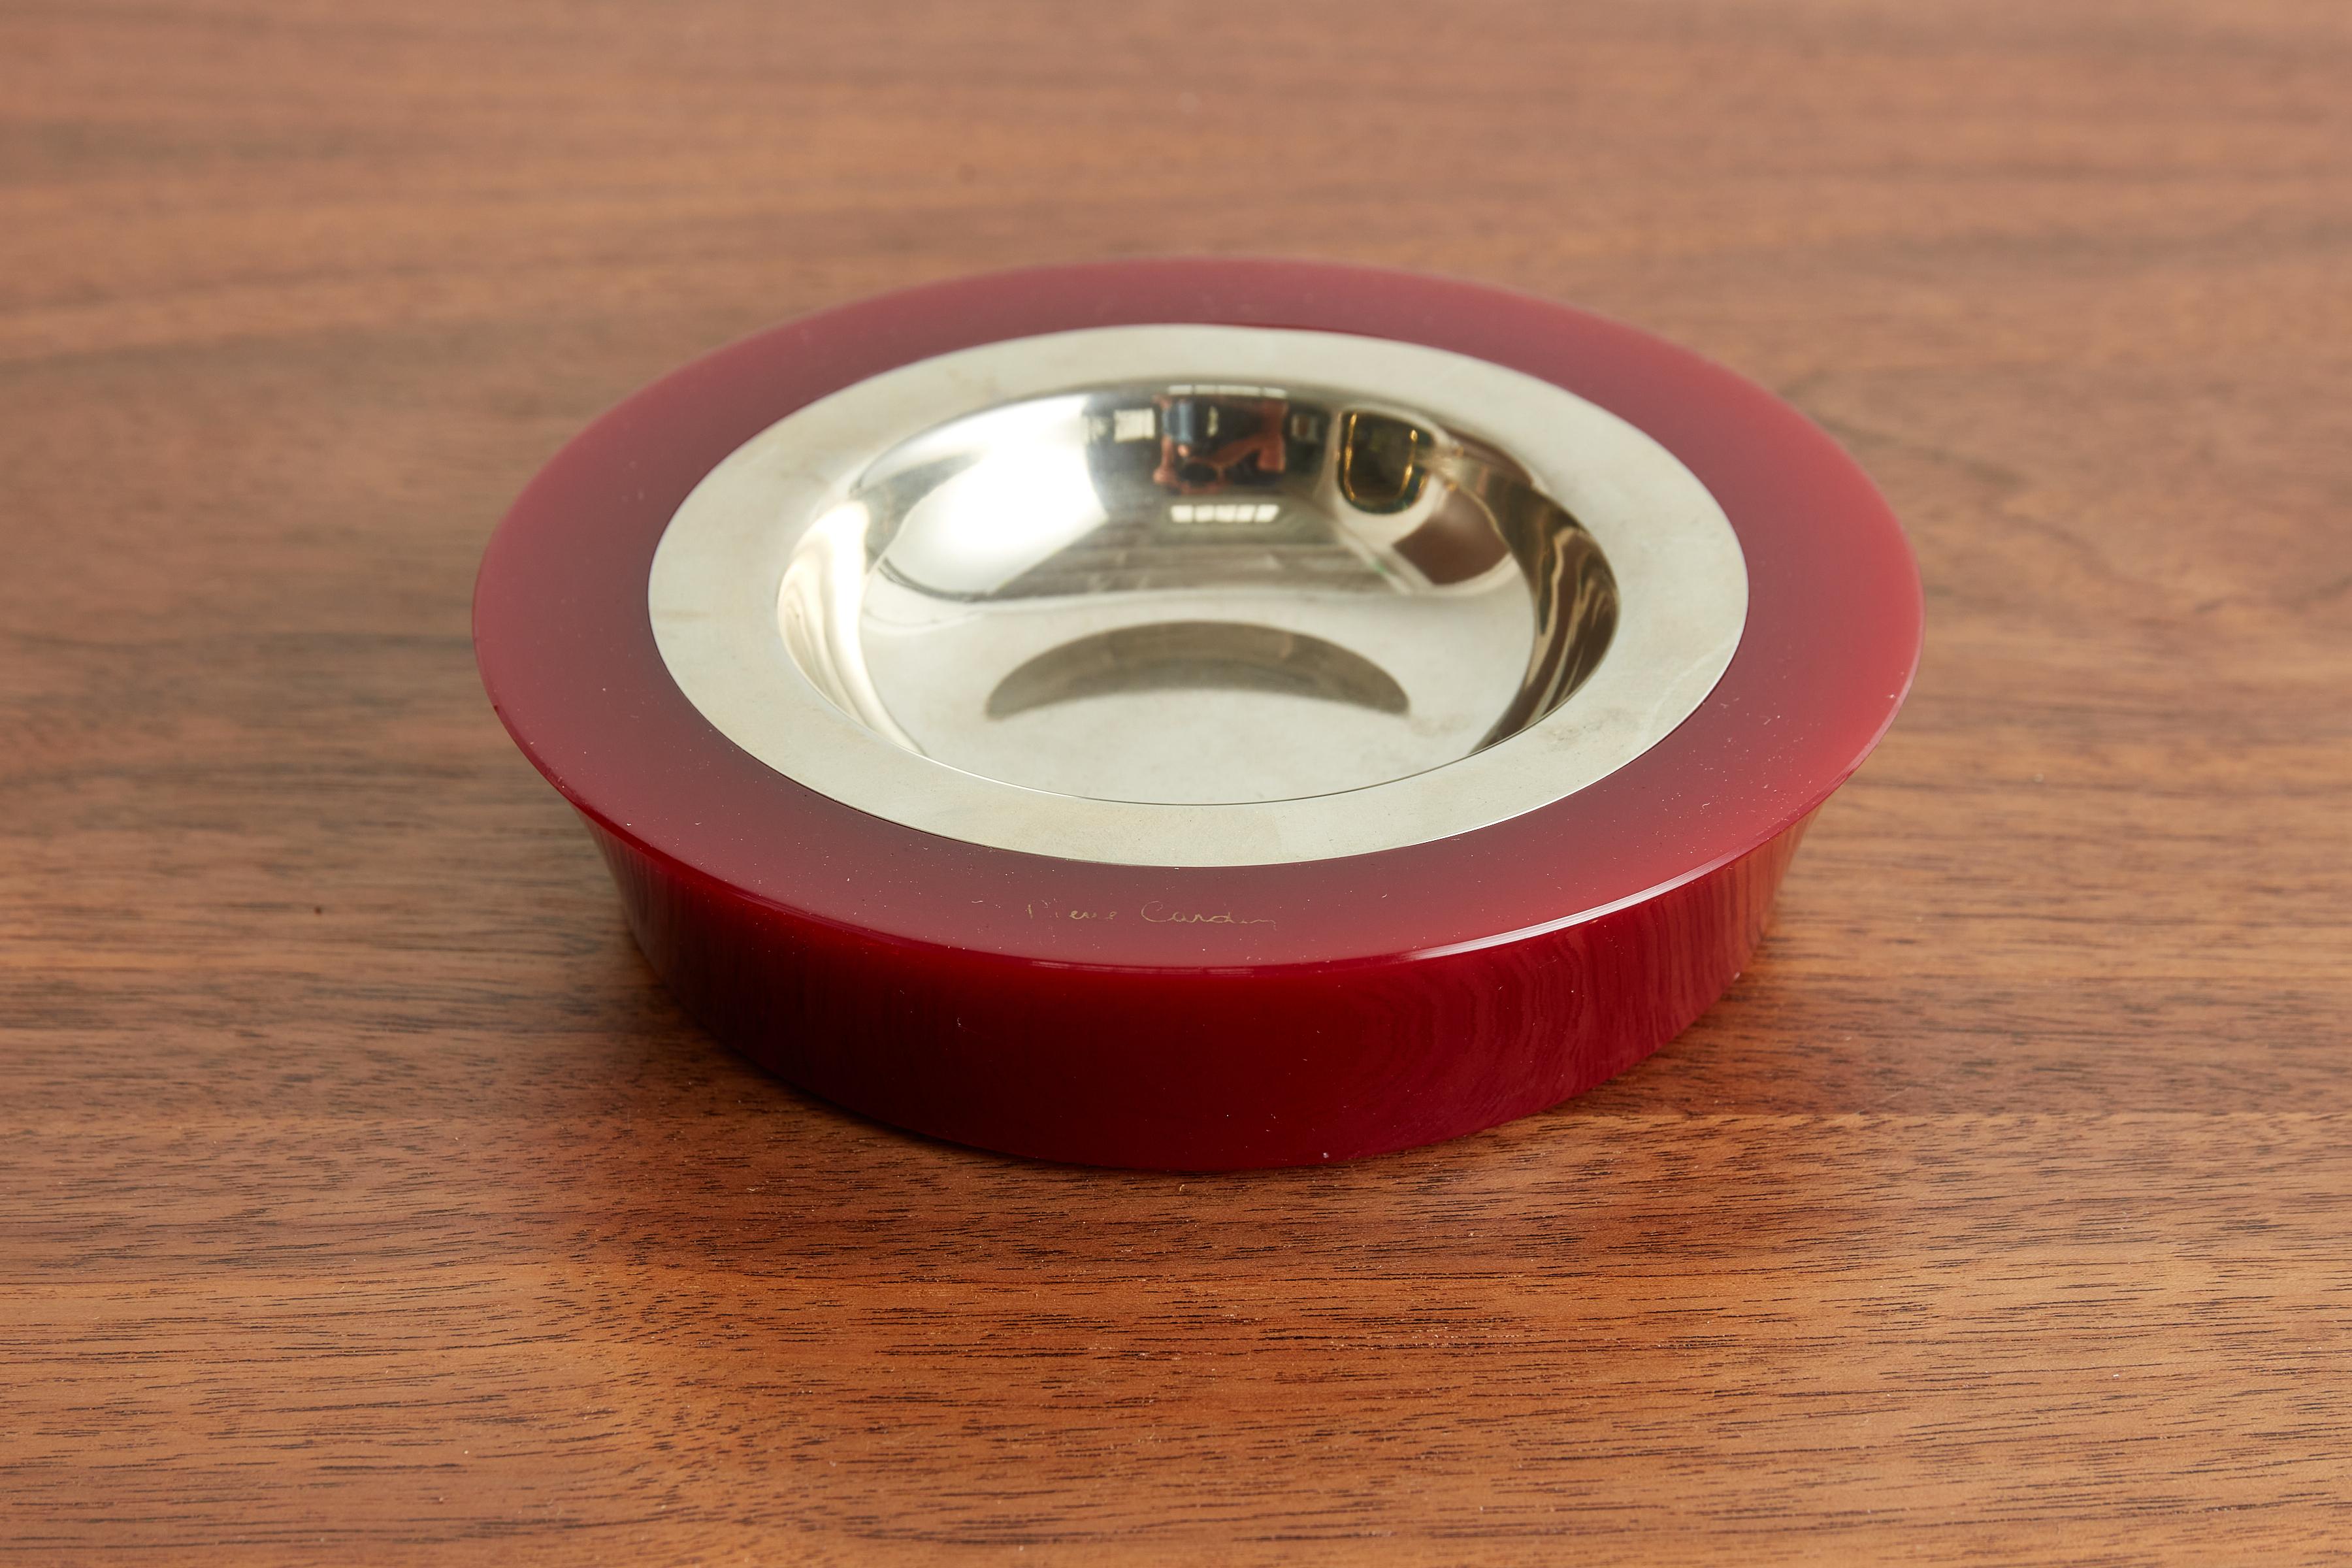 Pierre Cardin ashtray in cherry red lucite with removable brass insert.
Signed.